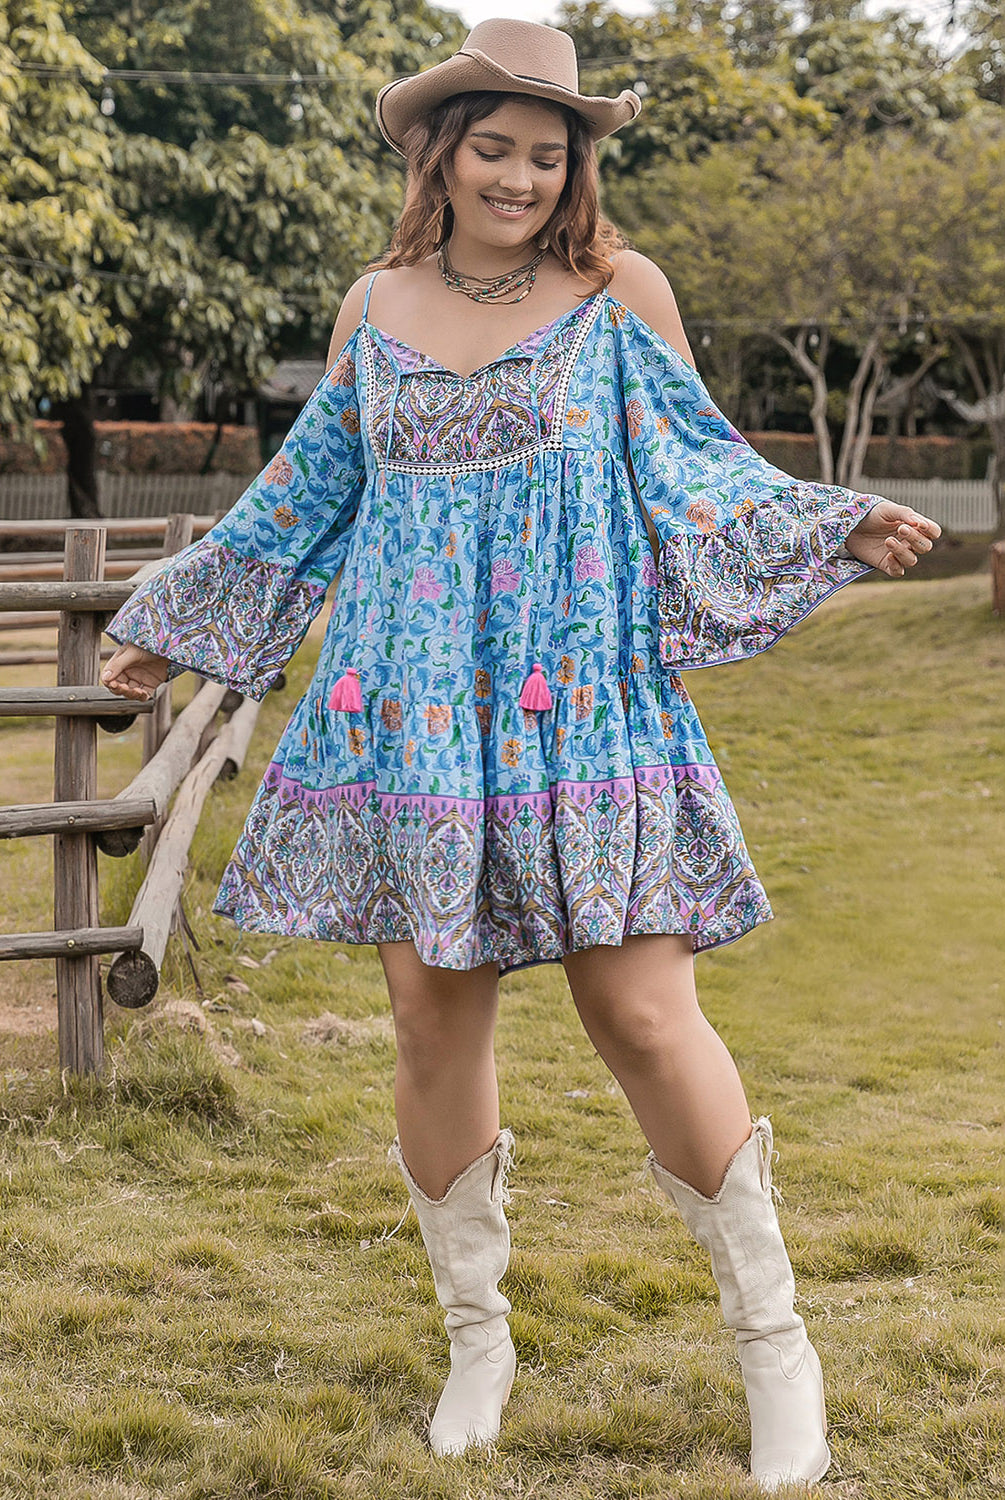 Woman wearing a plus size printed mini dress with long sleeves, featuring coral and sky blue colors, standing outdoors.